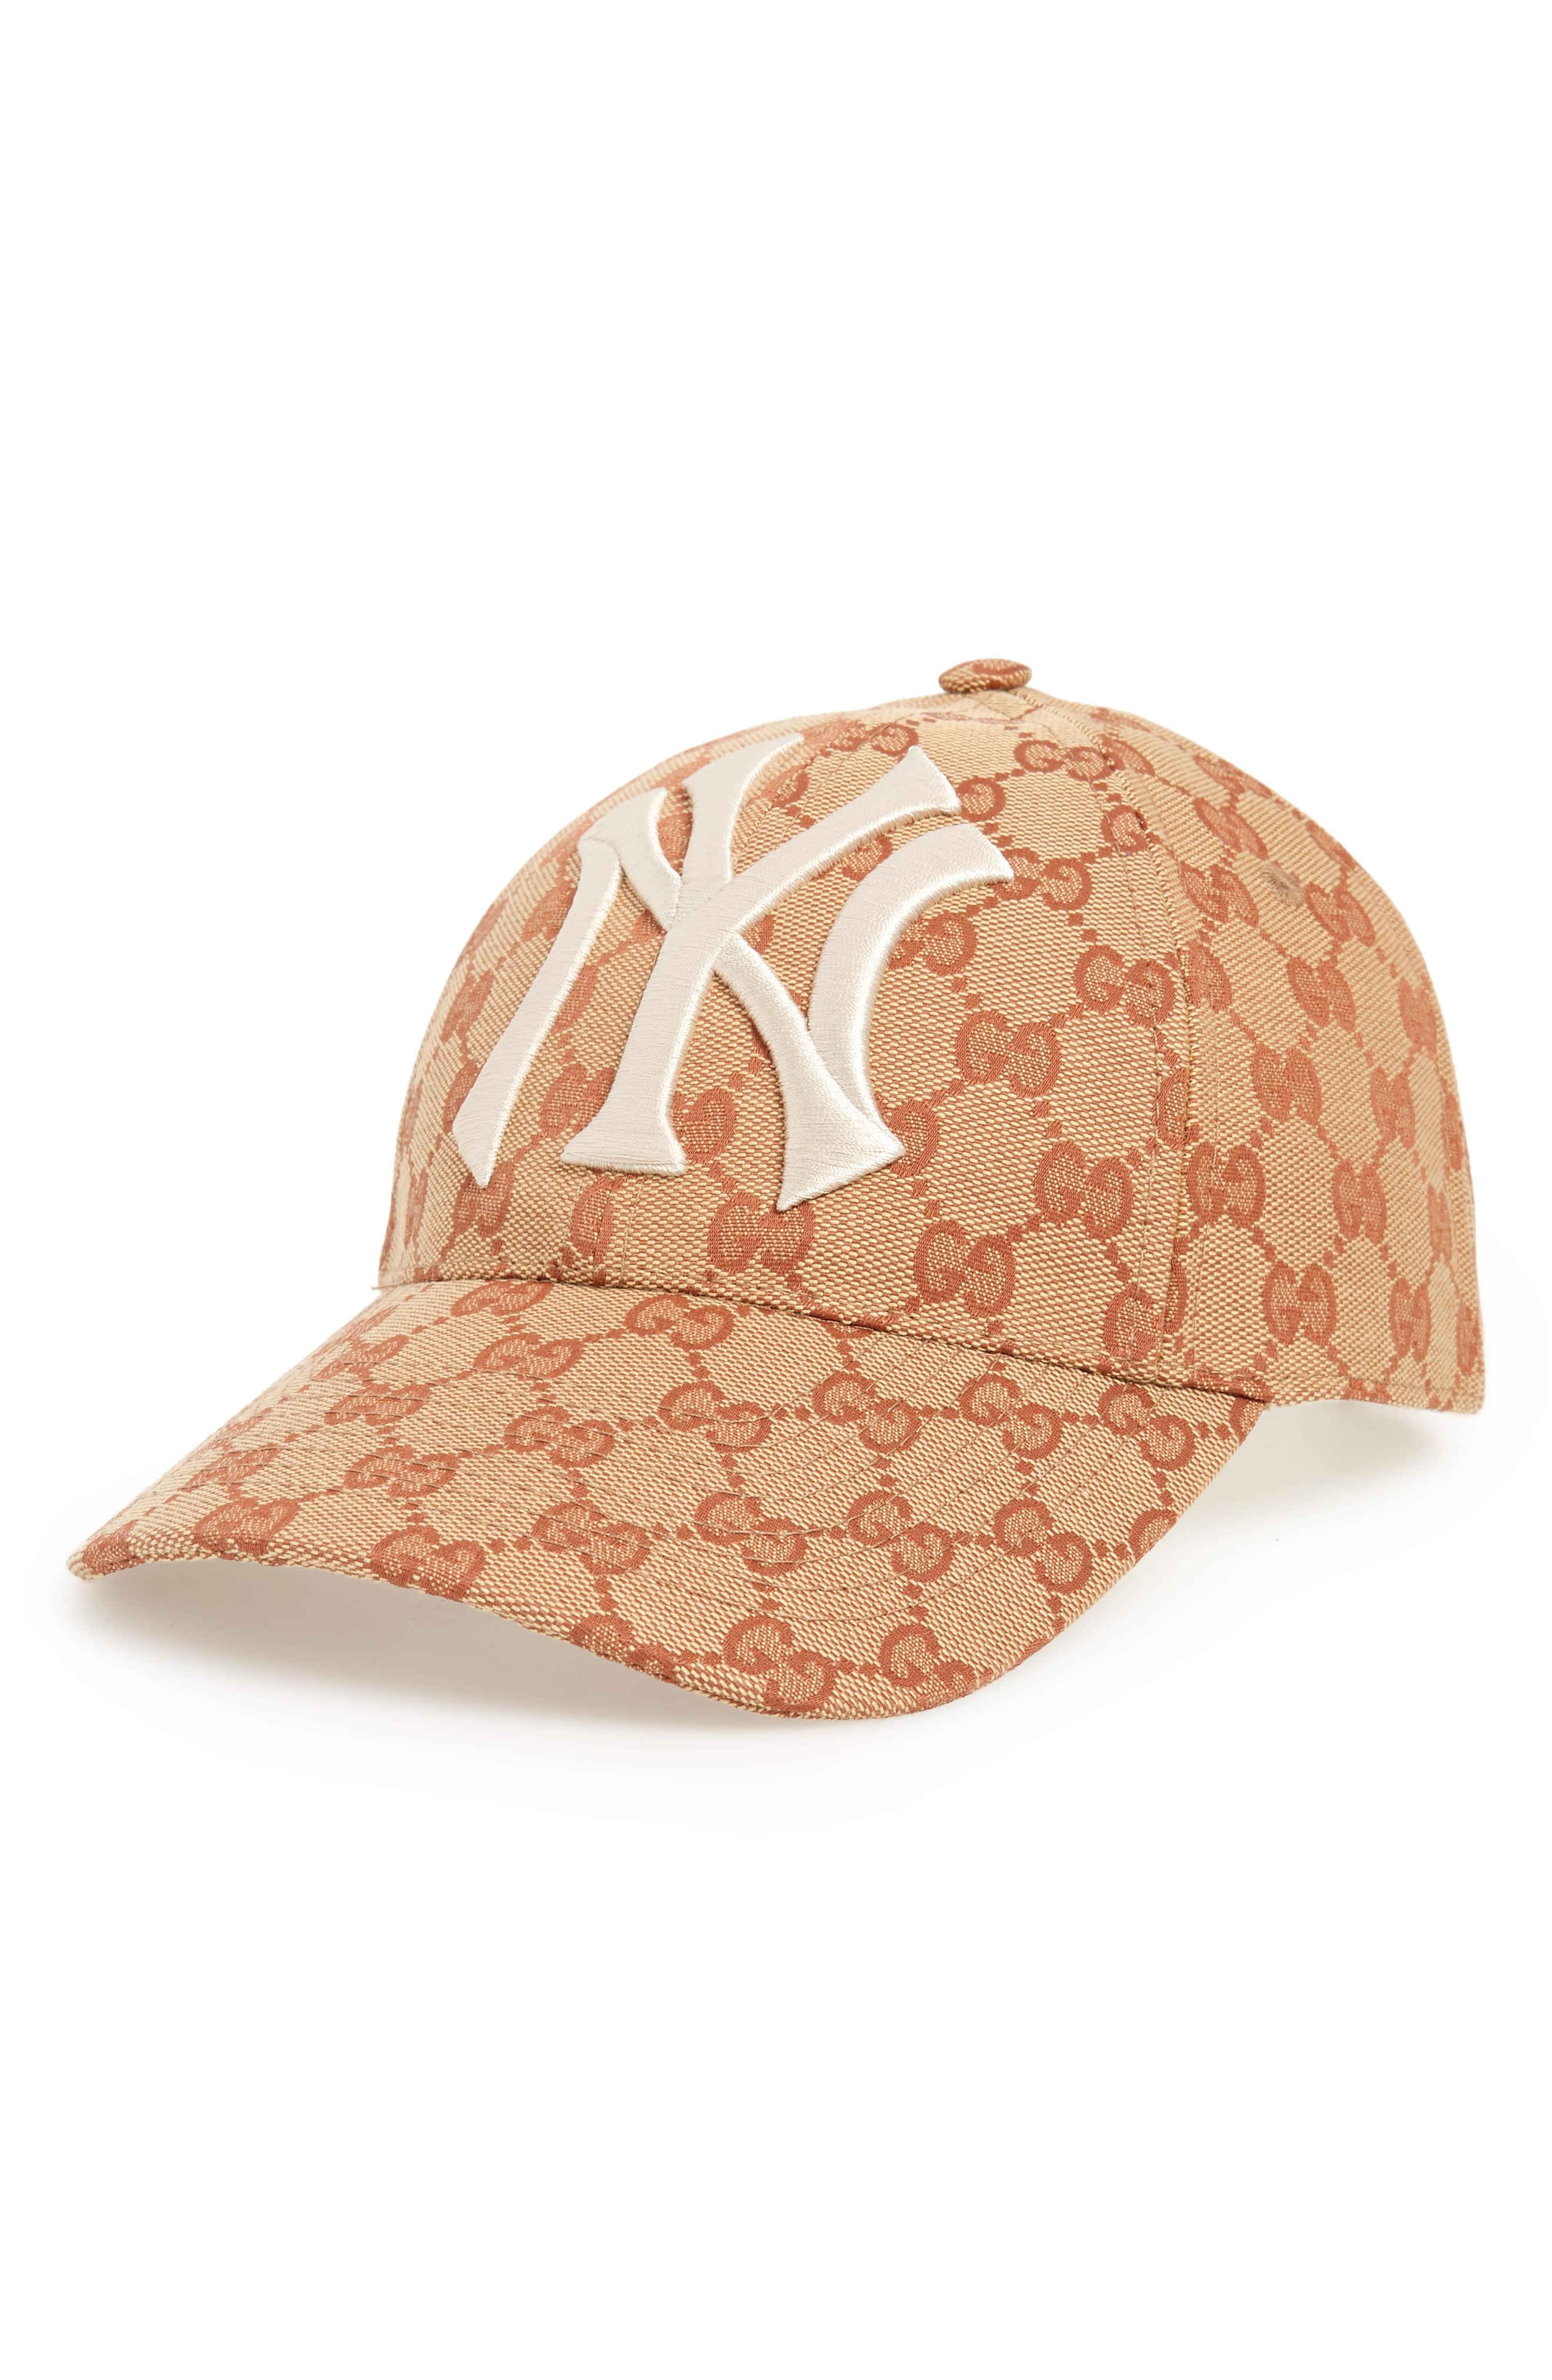 New York Yankees Gucci Top Sellers, UP TO 68% OFF | www.ldeventos.com